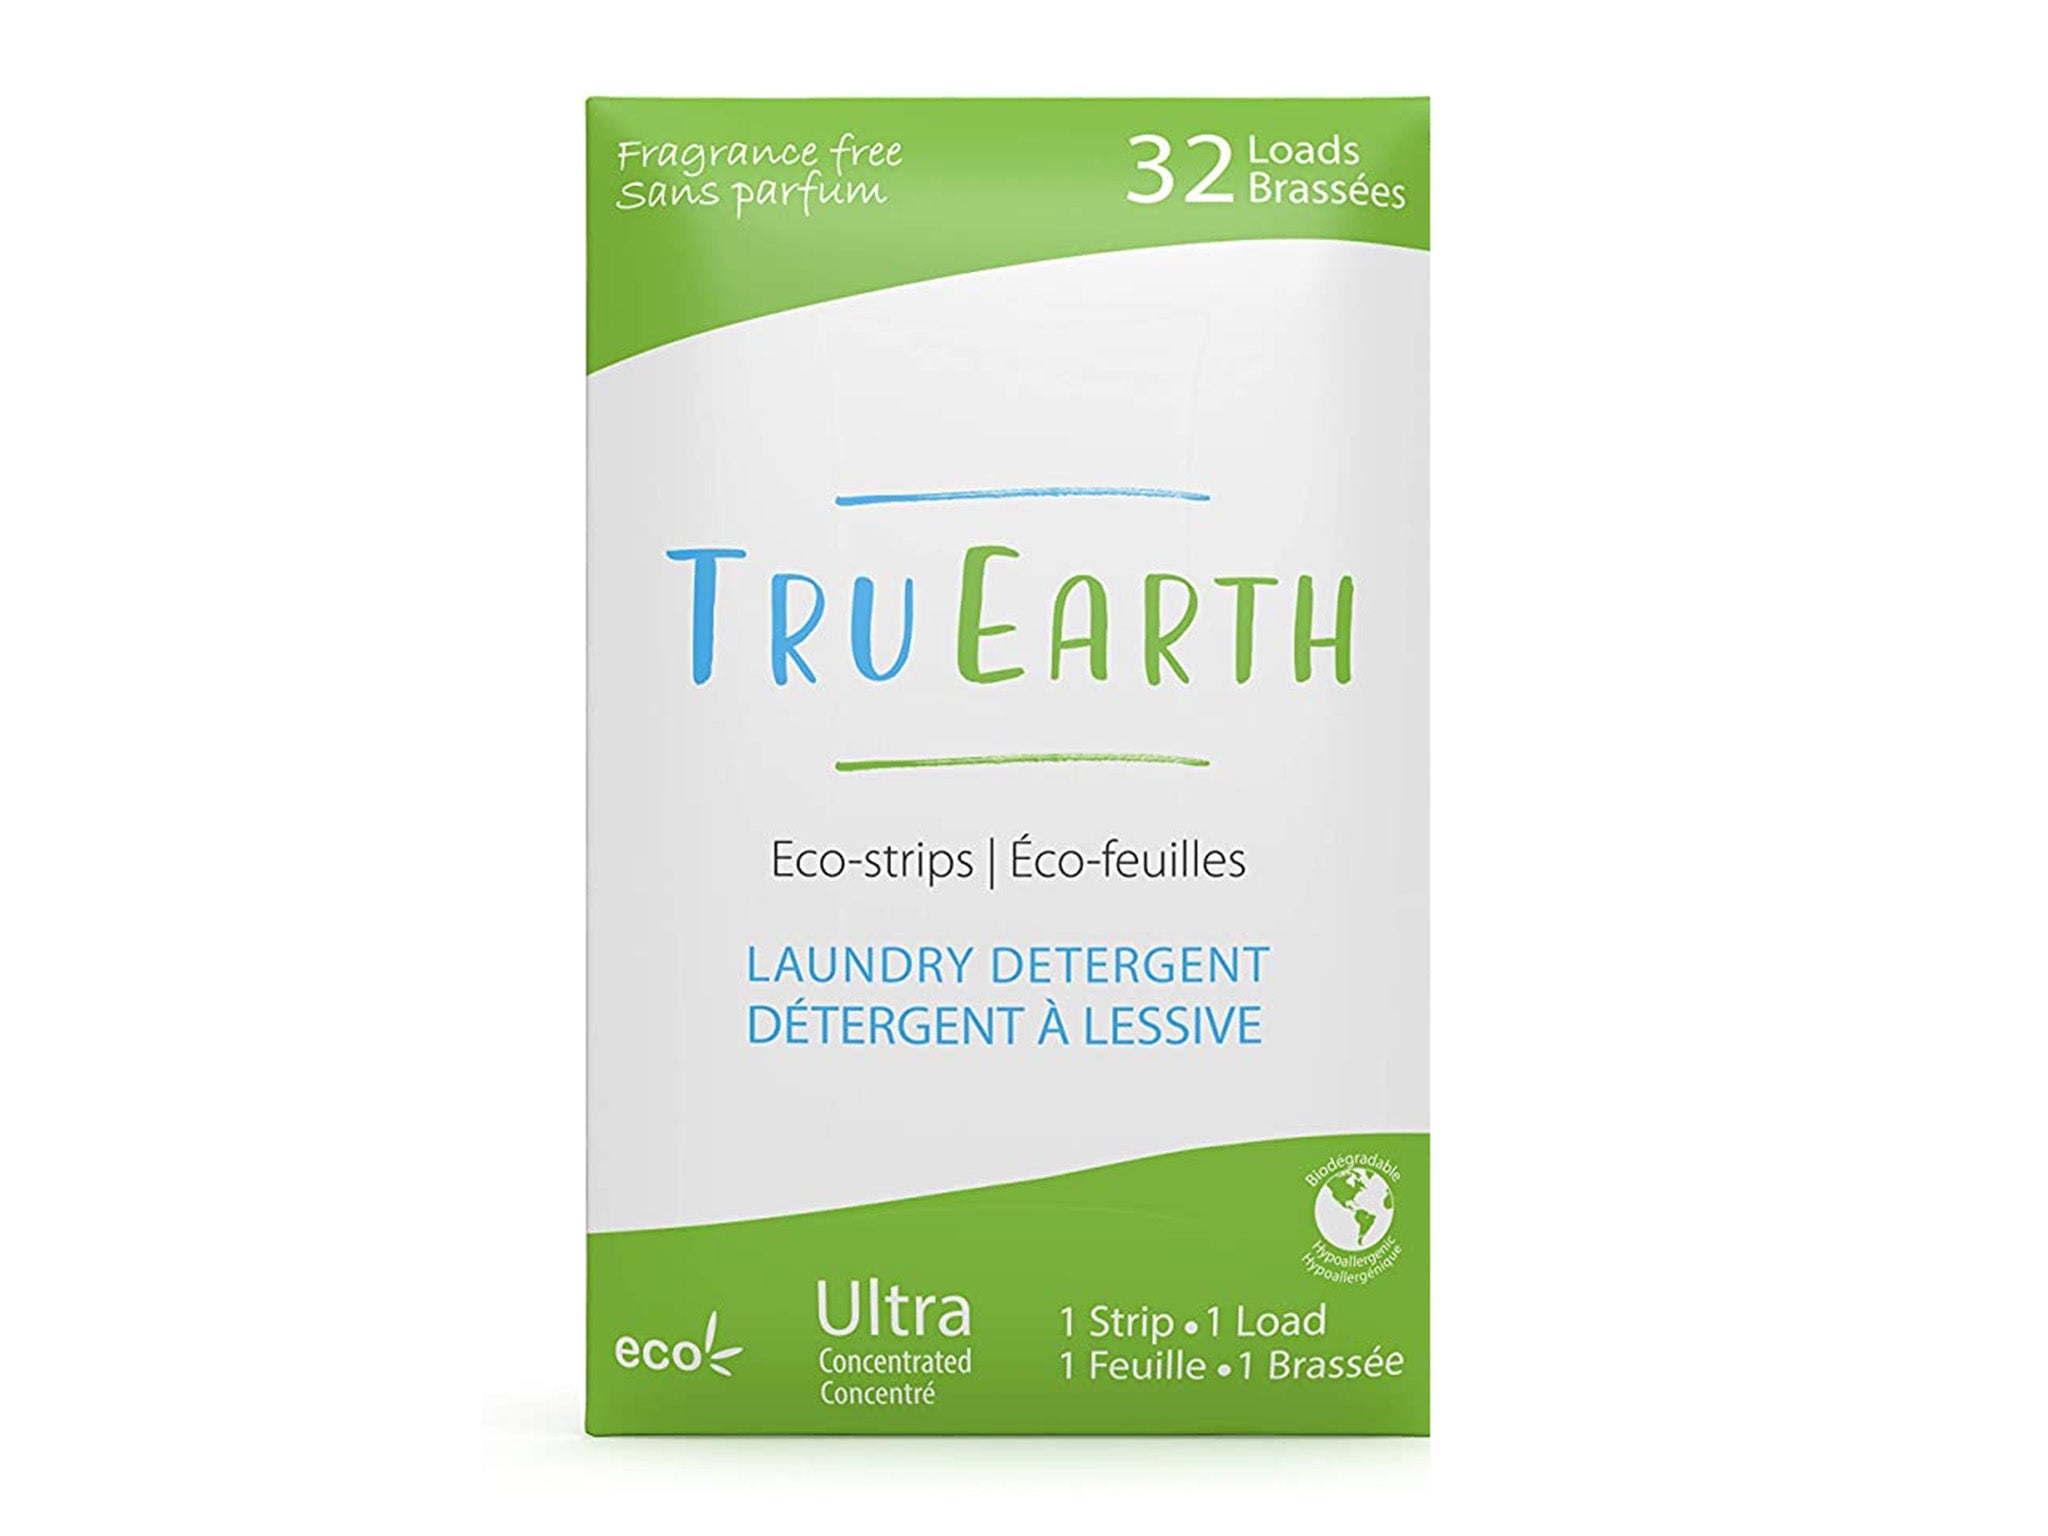 True Earth eco strips laundry detergent, fragrance free, 32 sheets indybest